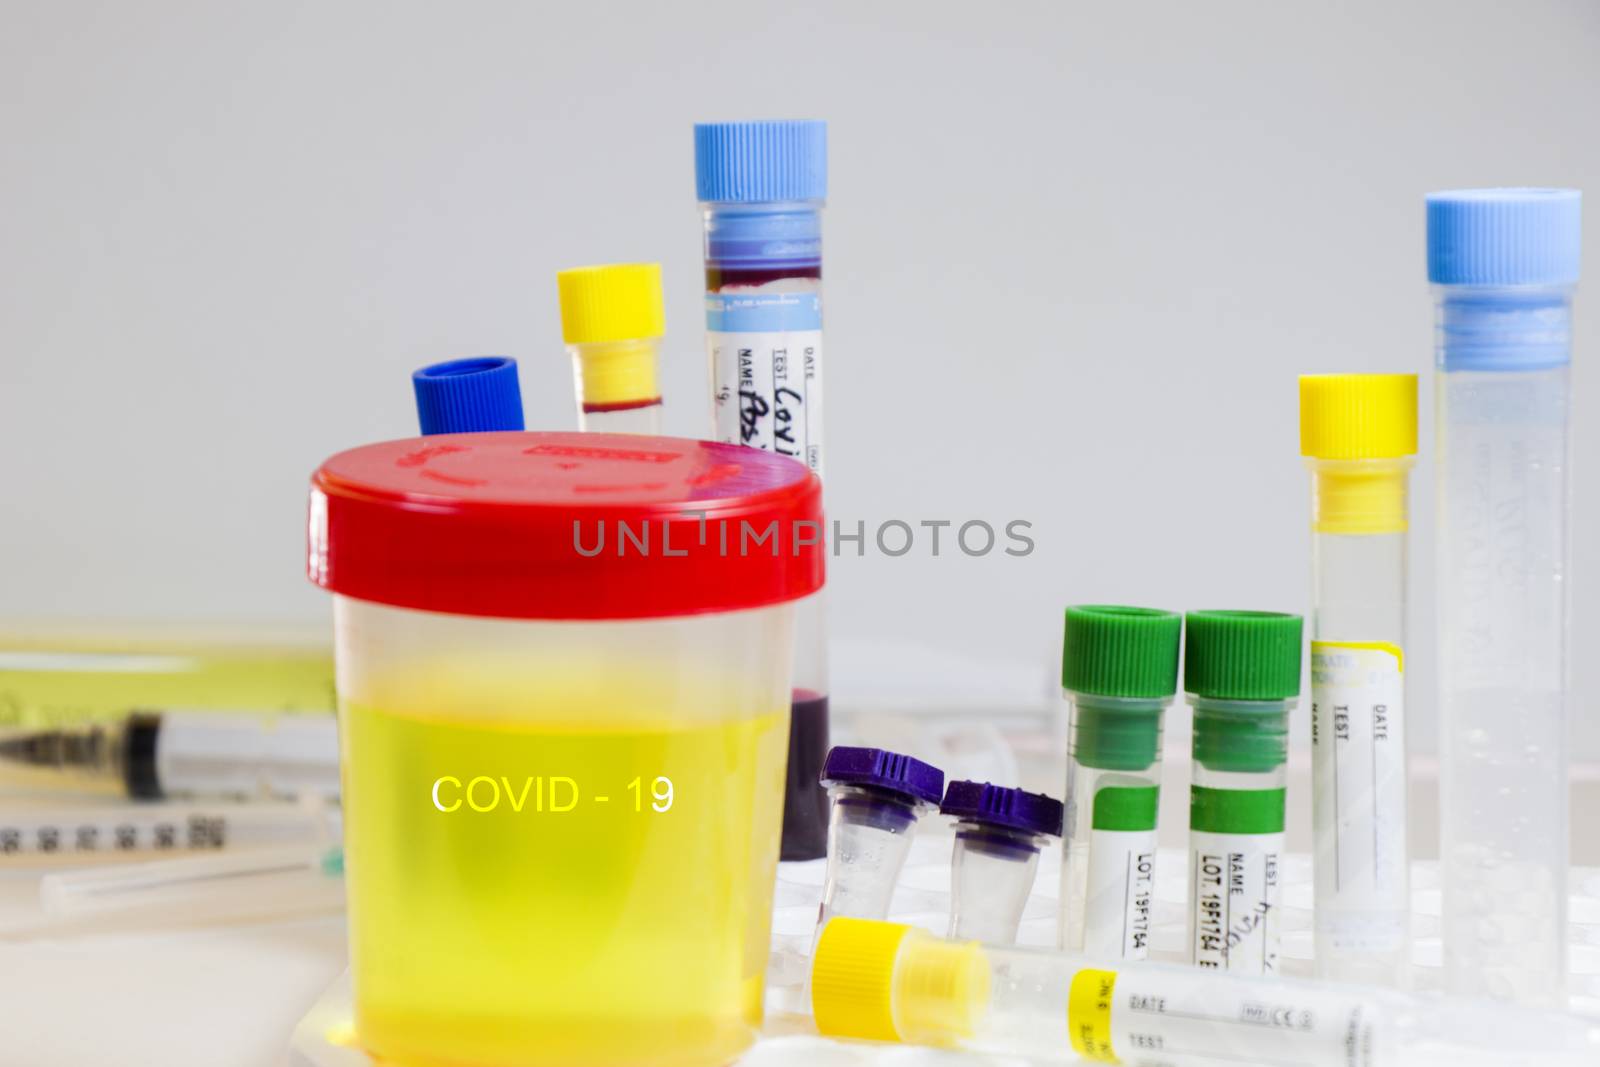 Covid-19 and coronavirus test, medical urine and pee test with blood and other tubes on the white background by Taidundua